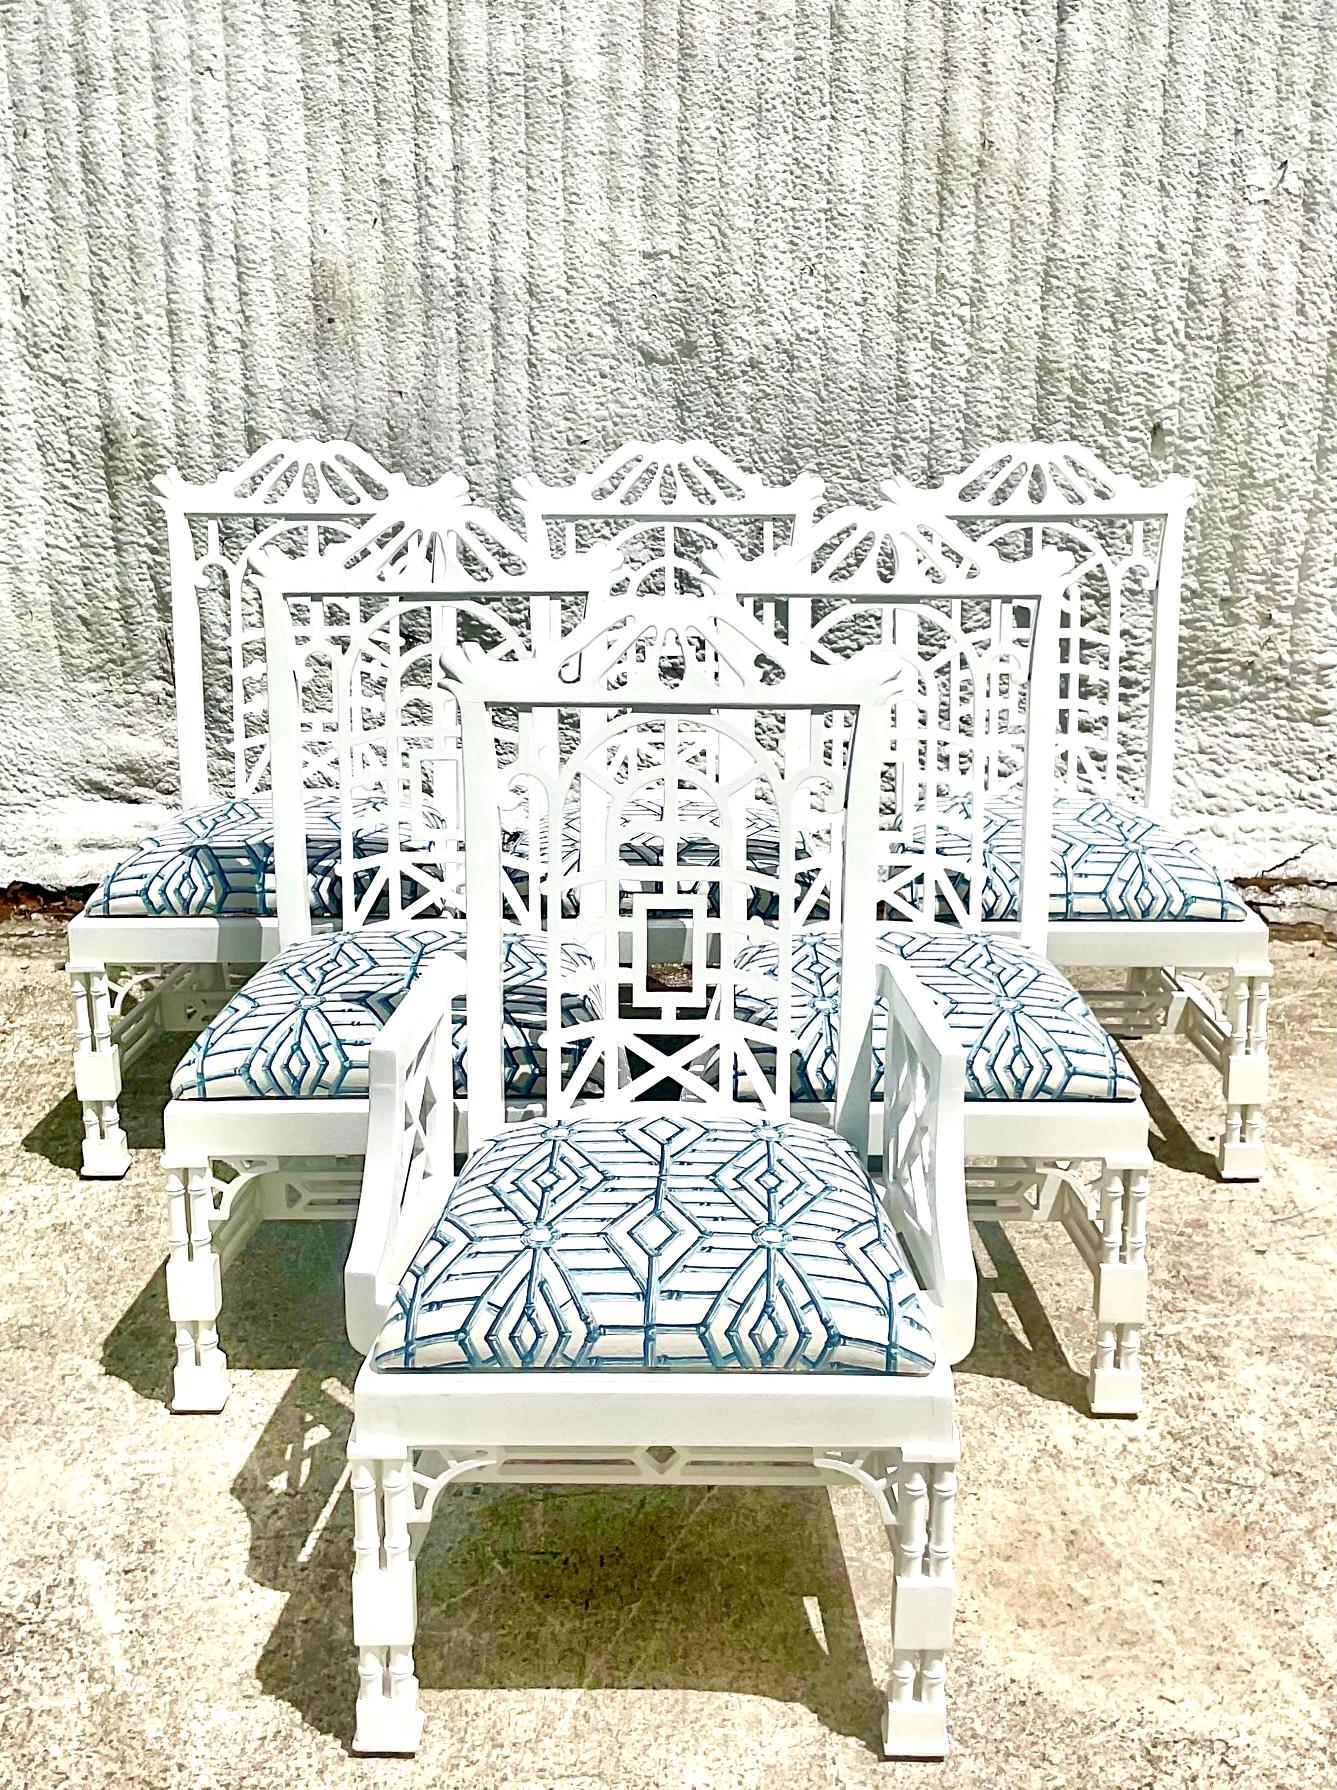 Pristine set of six American of Martinsville dining chairs. Freshly lacquered bright white on a chic pagoda shape. Acquired from a Palm Beach estate.